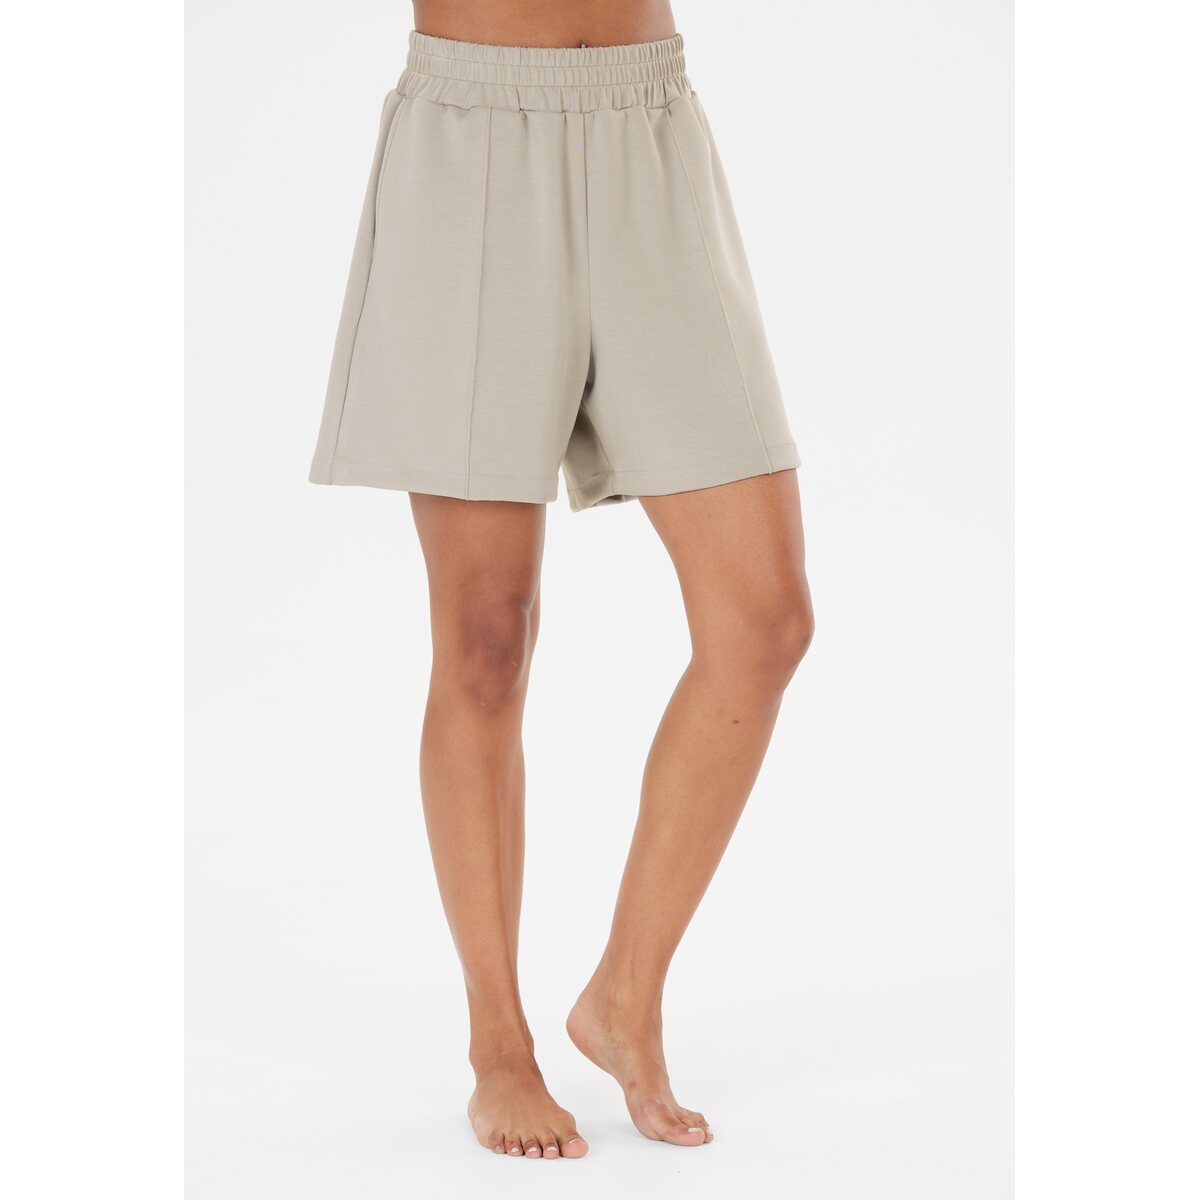 Athlecia Jacey Womenswear High Waisted Lounge Shorts 4 Shaws Department Stores